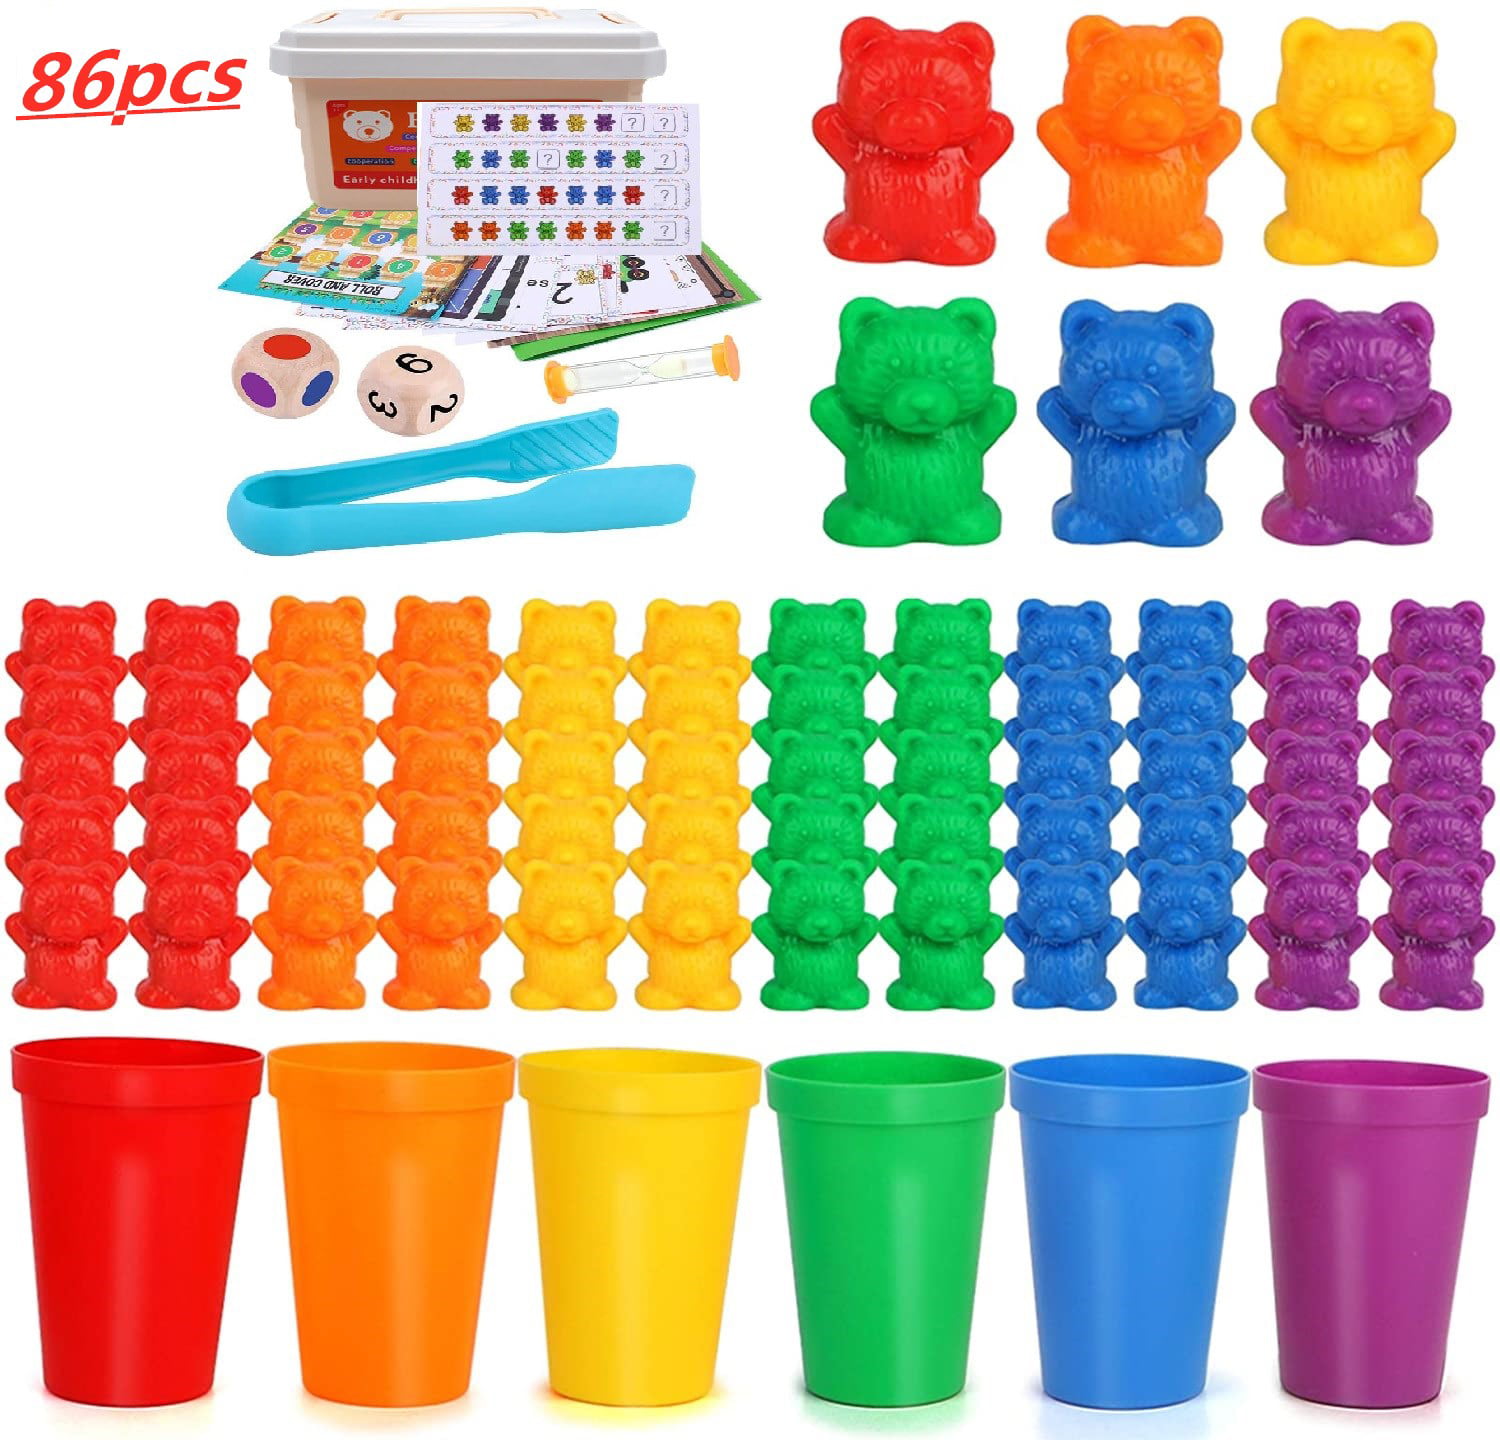 Counting & Sorting Toys for Learning Counting/Sorting Bears Toy Set with Matching Sorting Cups in Storage case Best Fun Educational Toy for Kids Ages 3 and up Mathematics STEM Education 